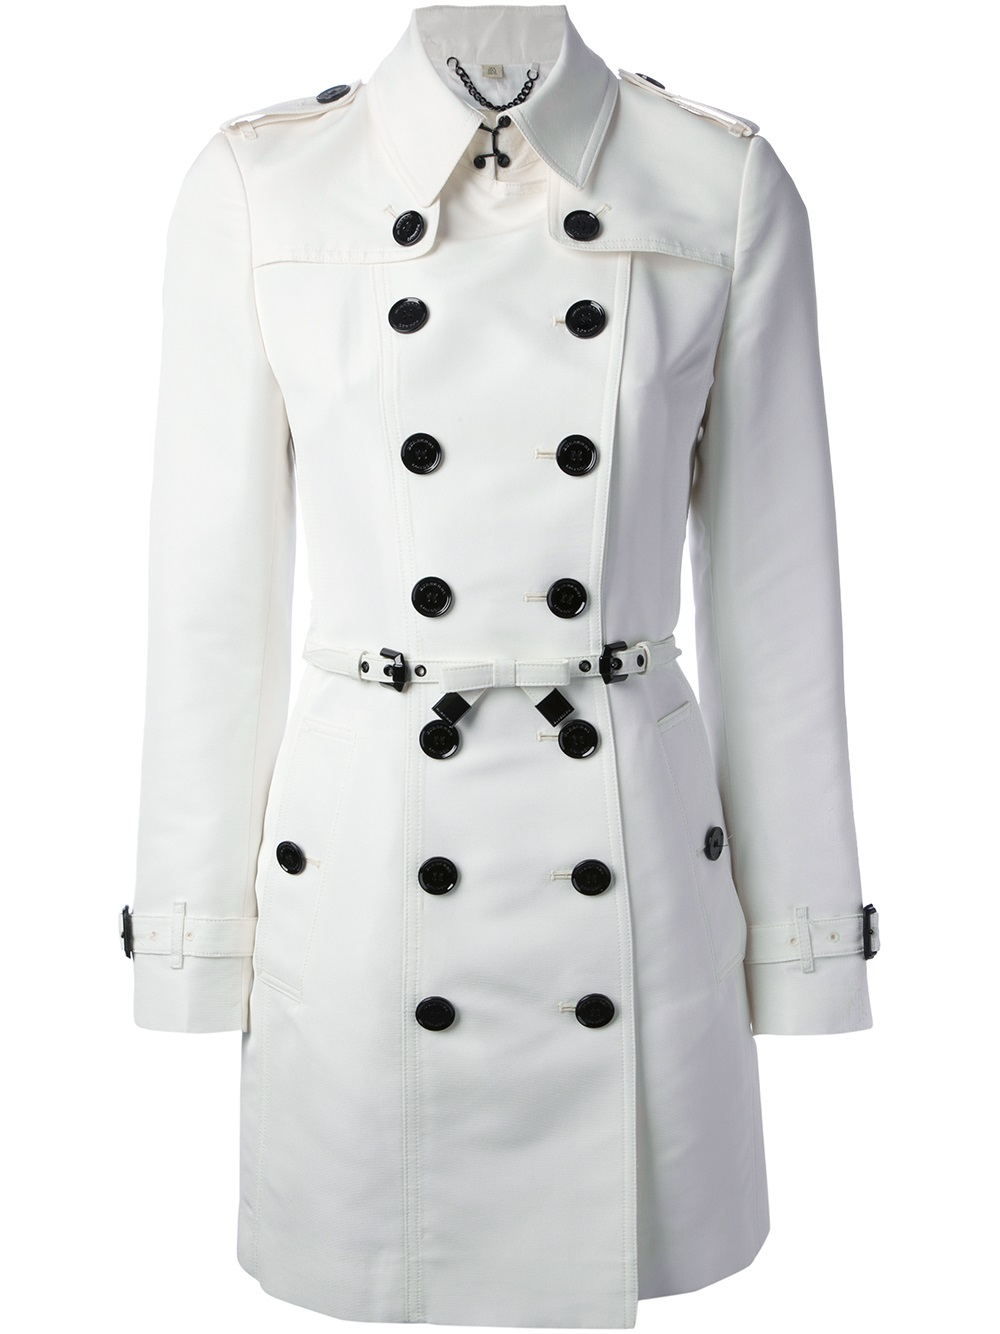 Burberry Double Breasted Trench Coat in White - Lyst